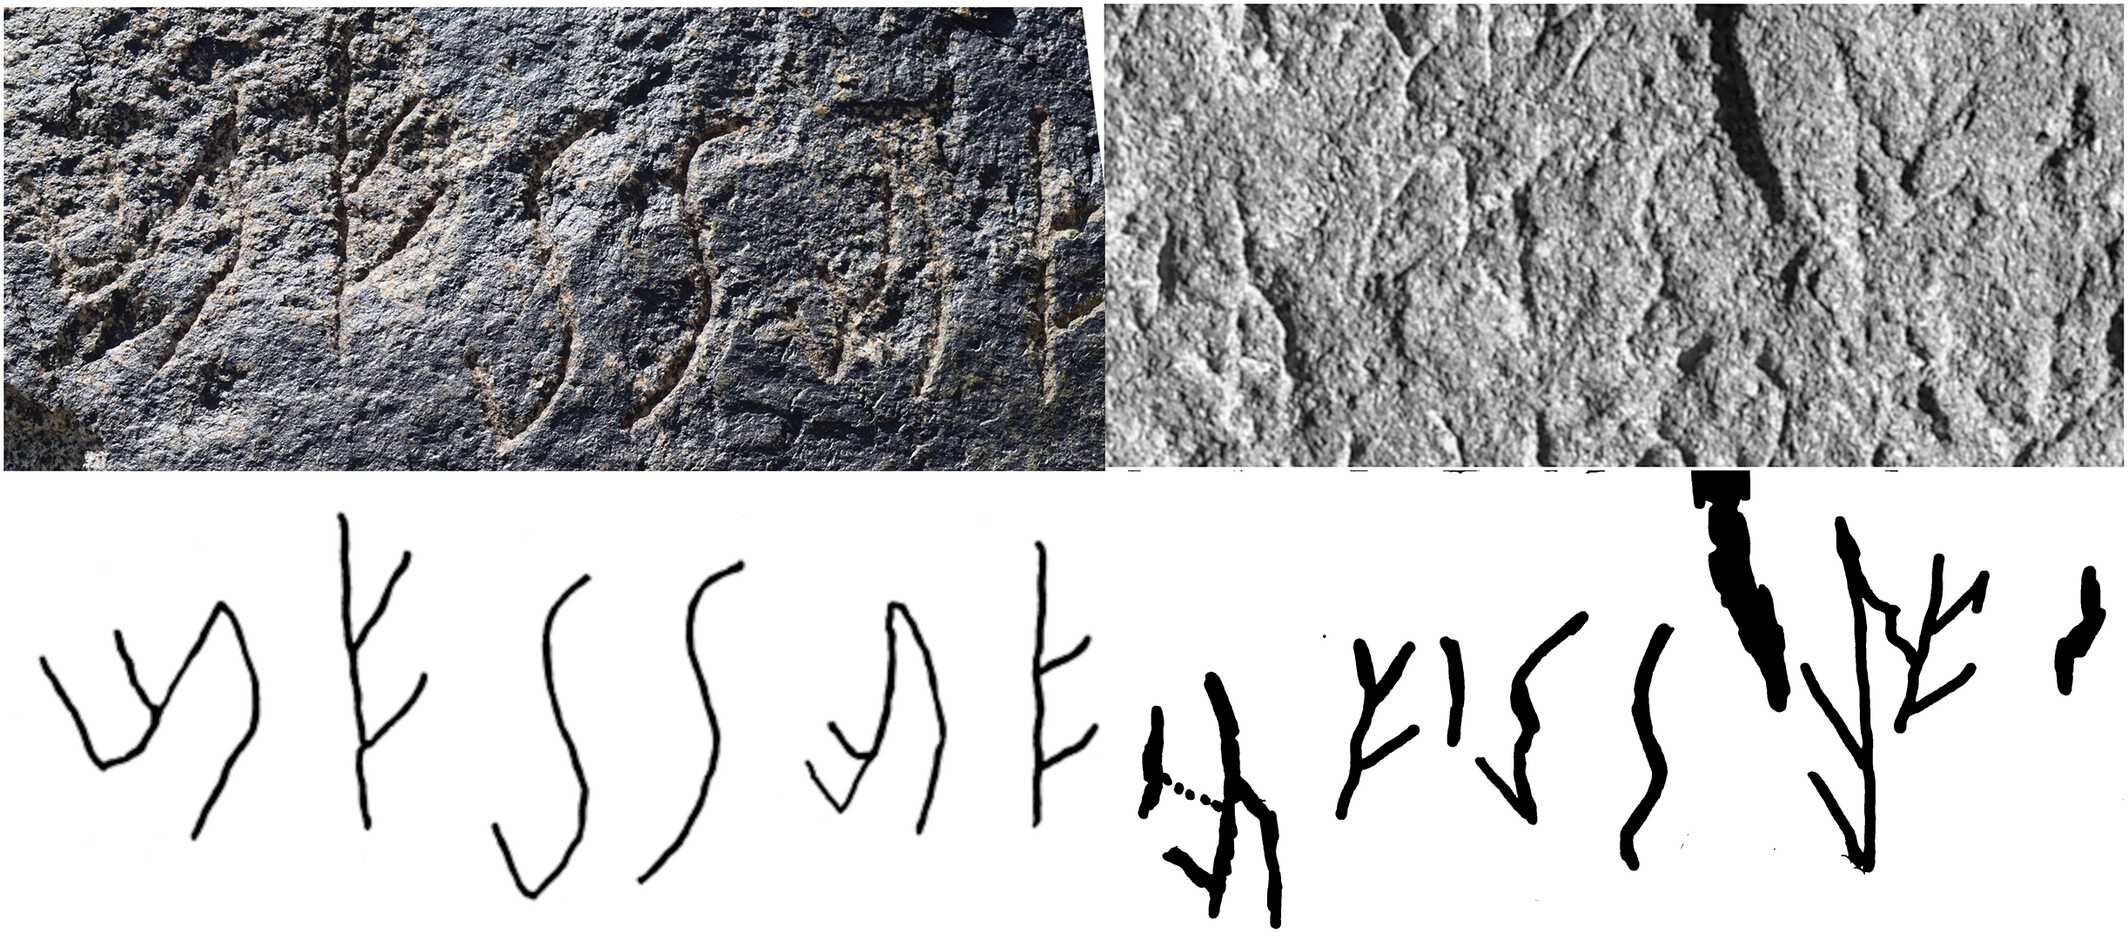 Ancient 'unknown Kushan script' finally deciphered 18